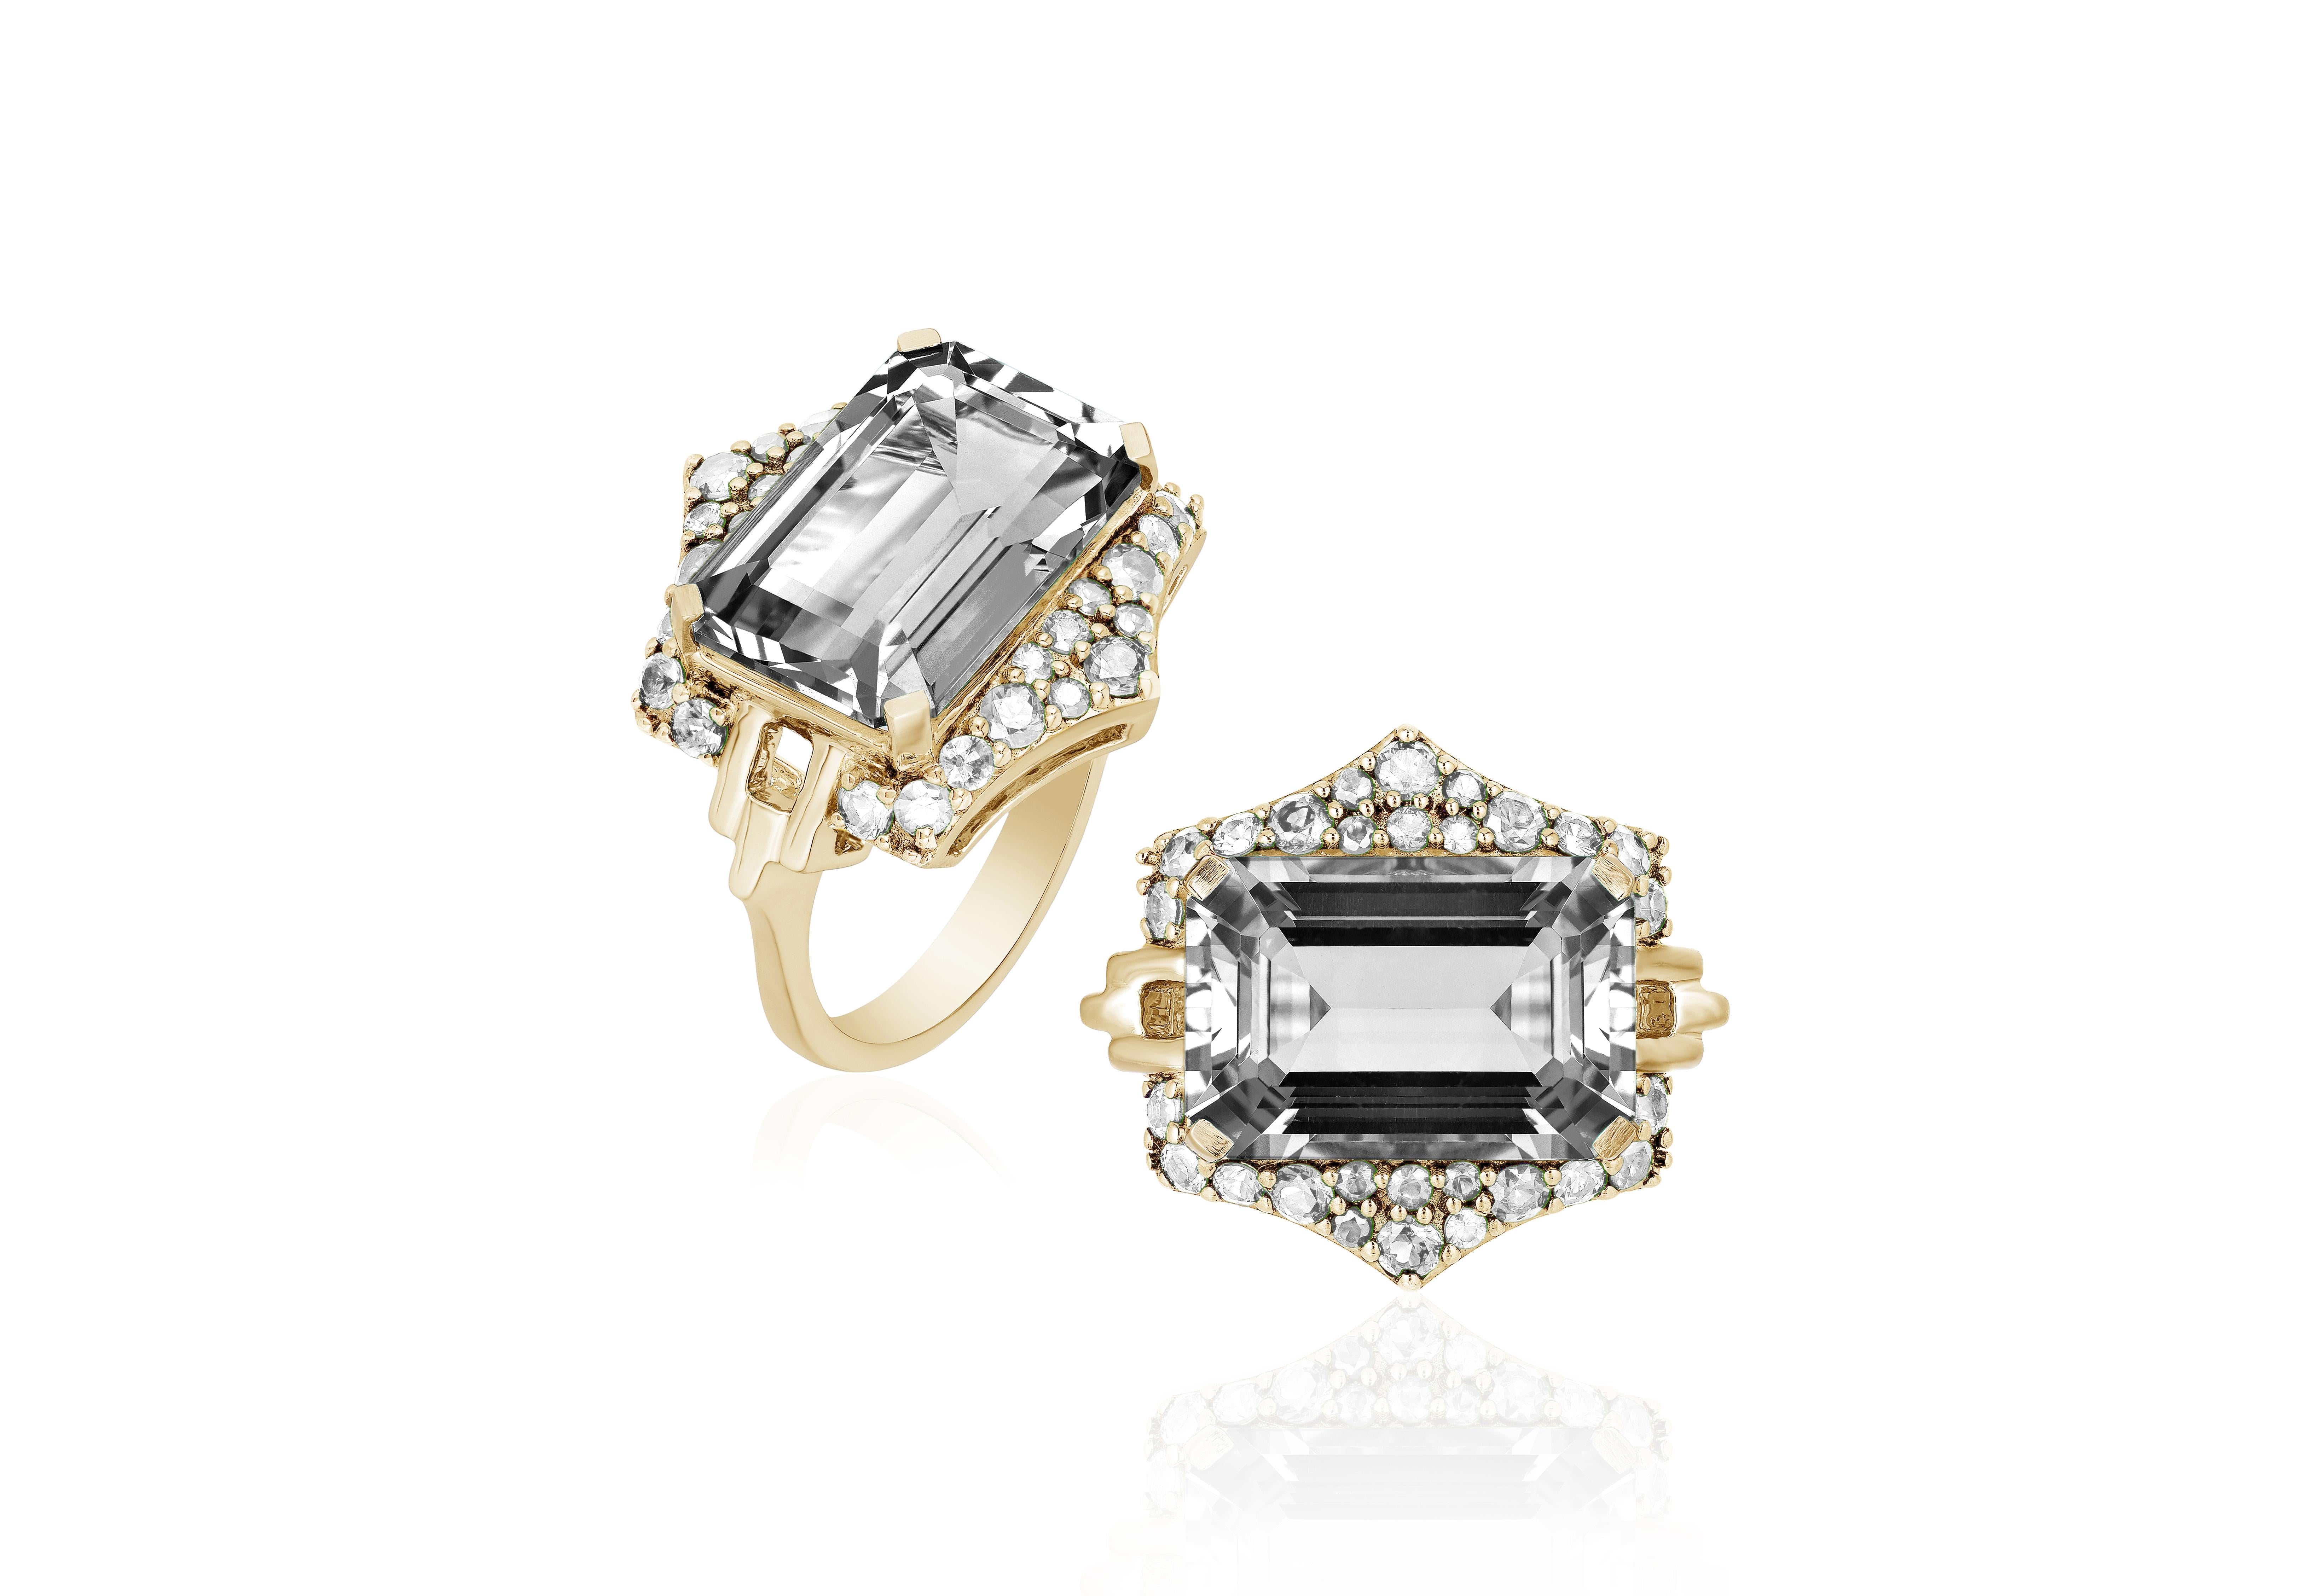 This Rock Crystal Emerald Cut Ring with Diamonds is a stunning piece of jewelry from the 'Rainforest' Collection. The ring is crafted from 18K yellow gold and features a beautiful emerald-cut rock crystal as its centerpiece, surrounded by sparkling